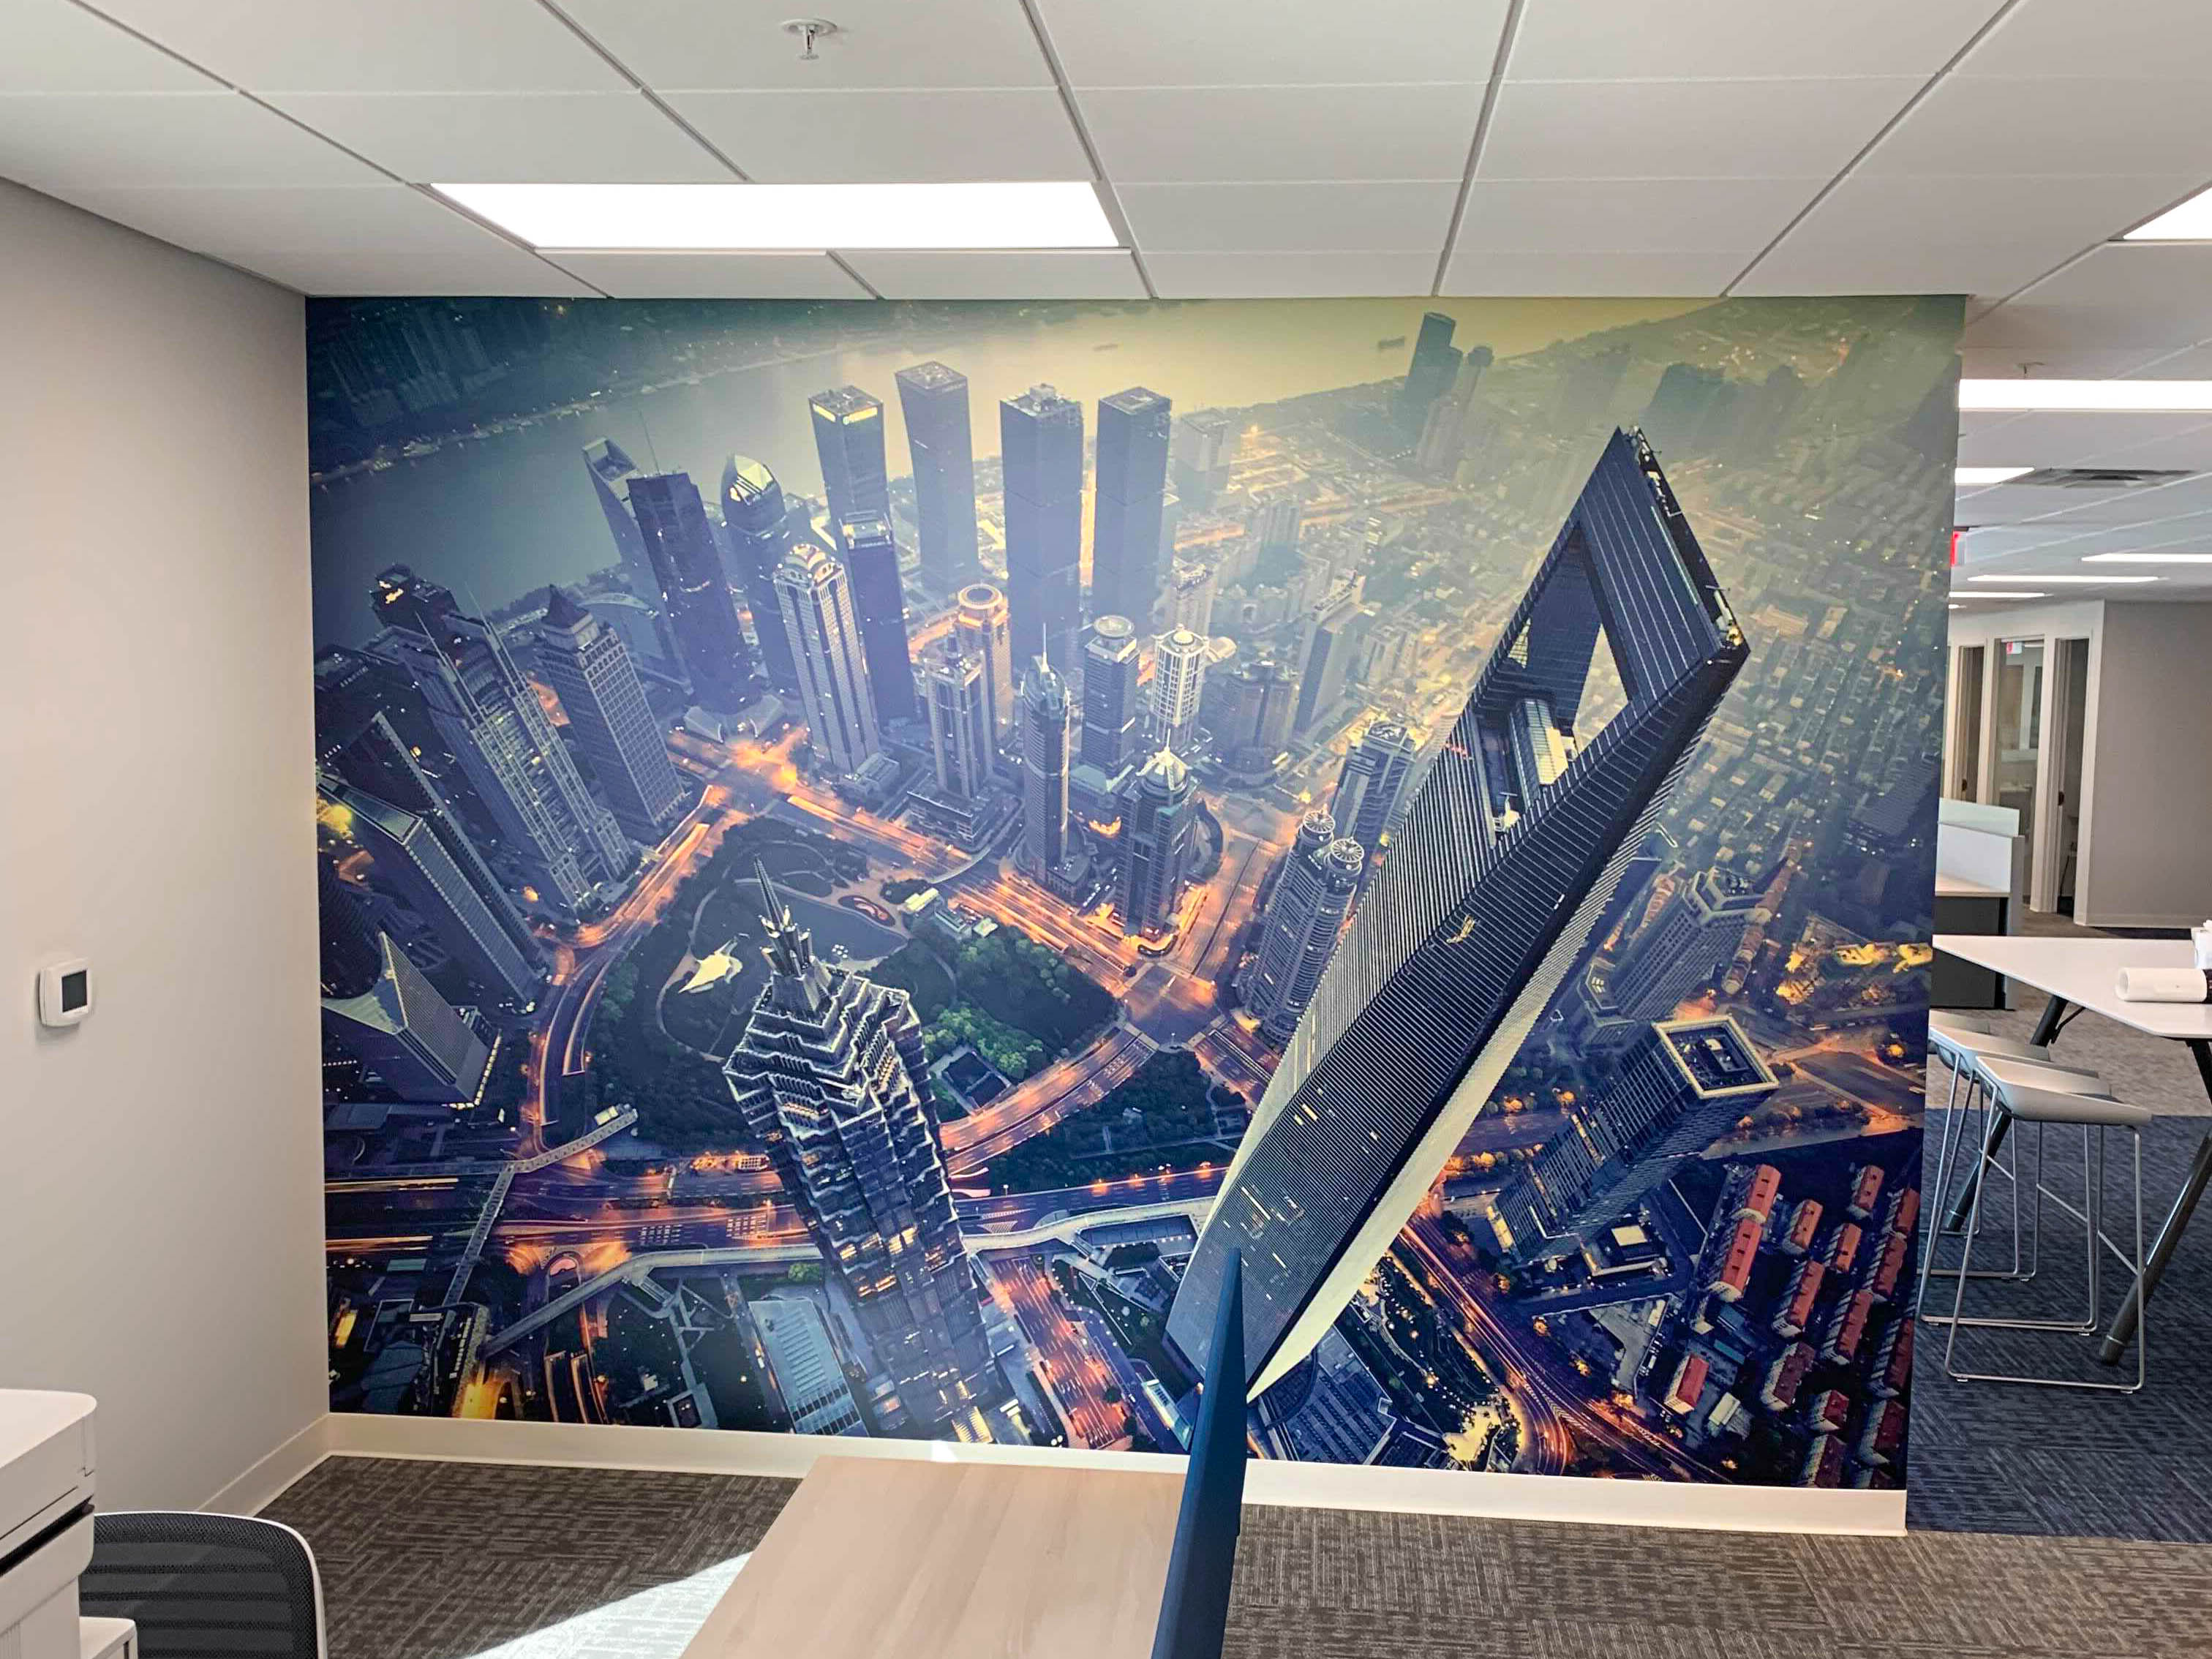 Wall mural in office workspace